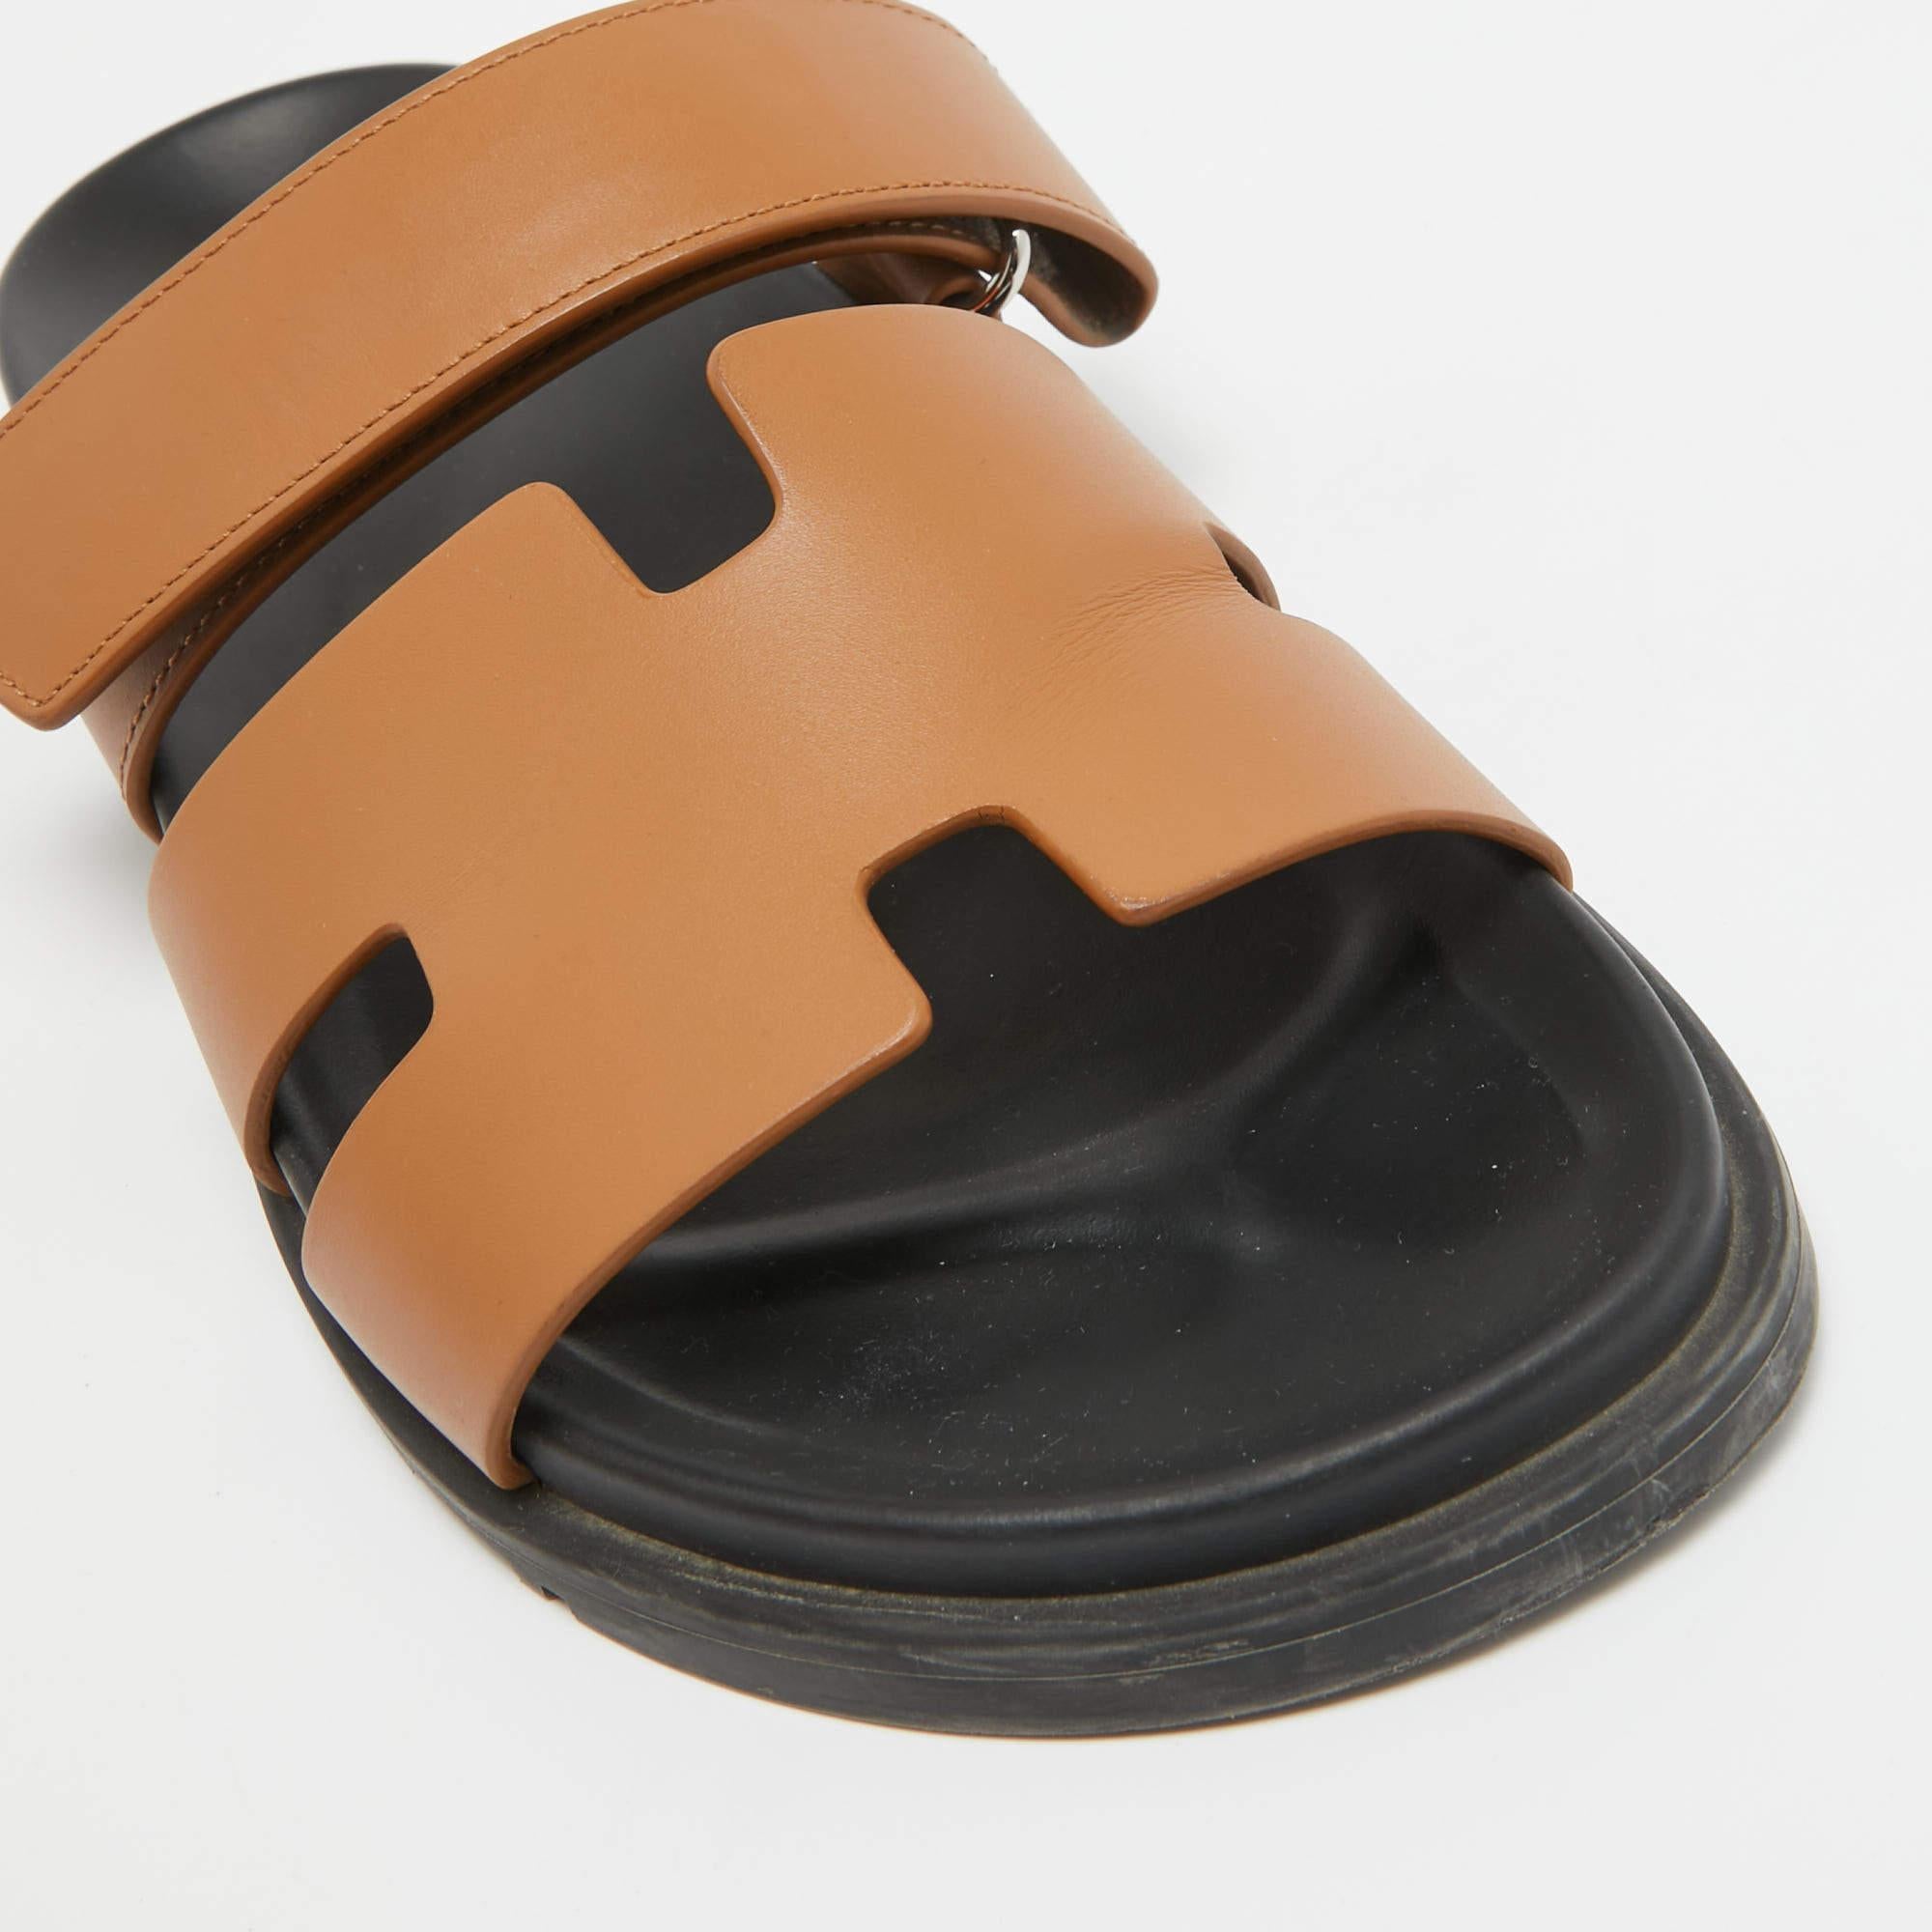 These sandals will frame your feet in an elegant manner. Crafted from quality materials, they display a classy design and comfortable insoles.


Includes: Original Dustbag, Original Box